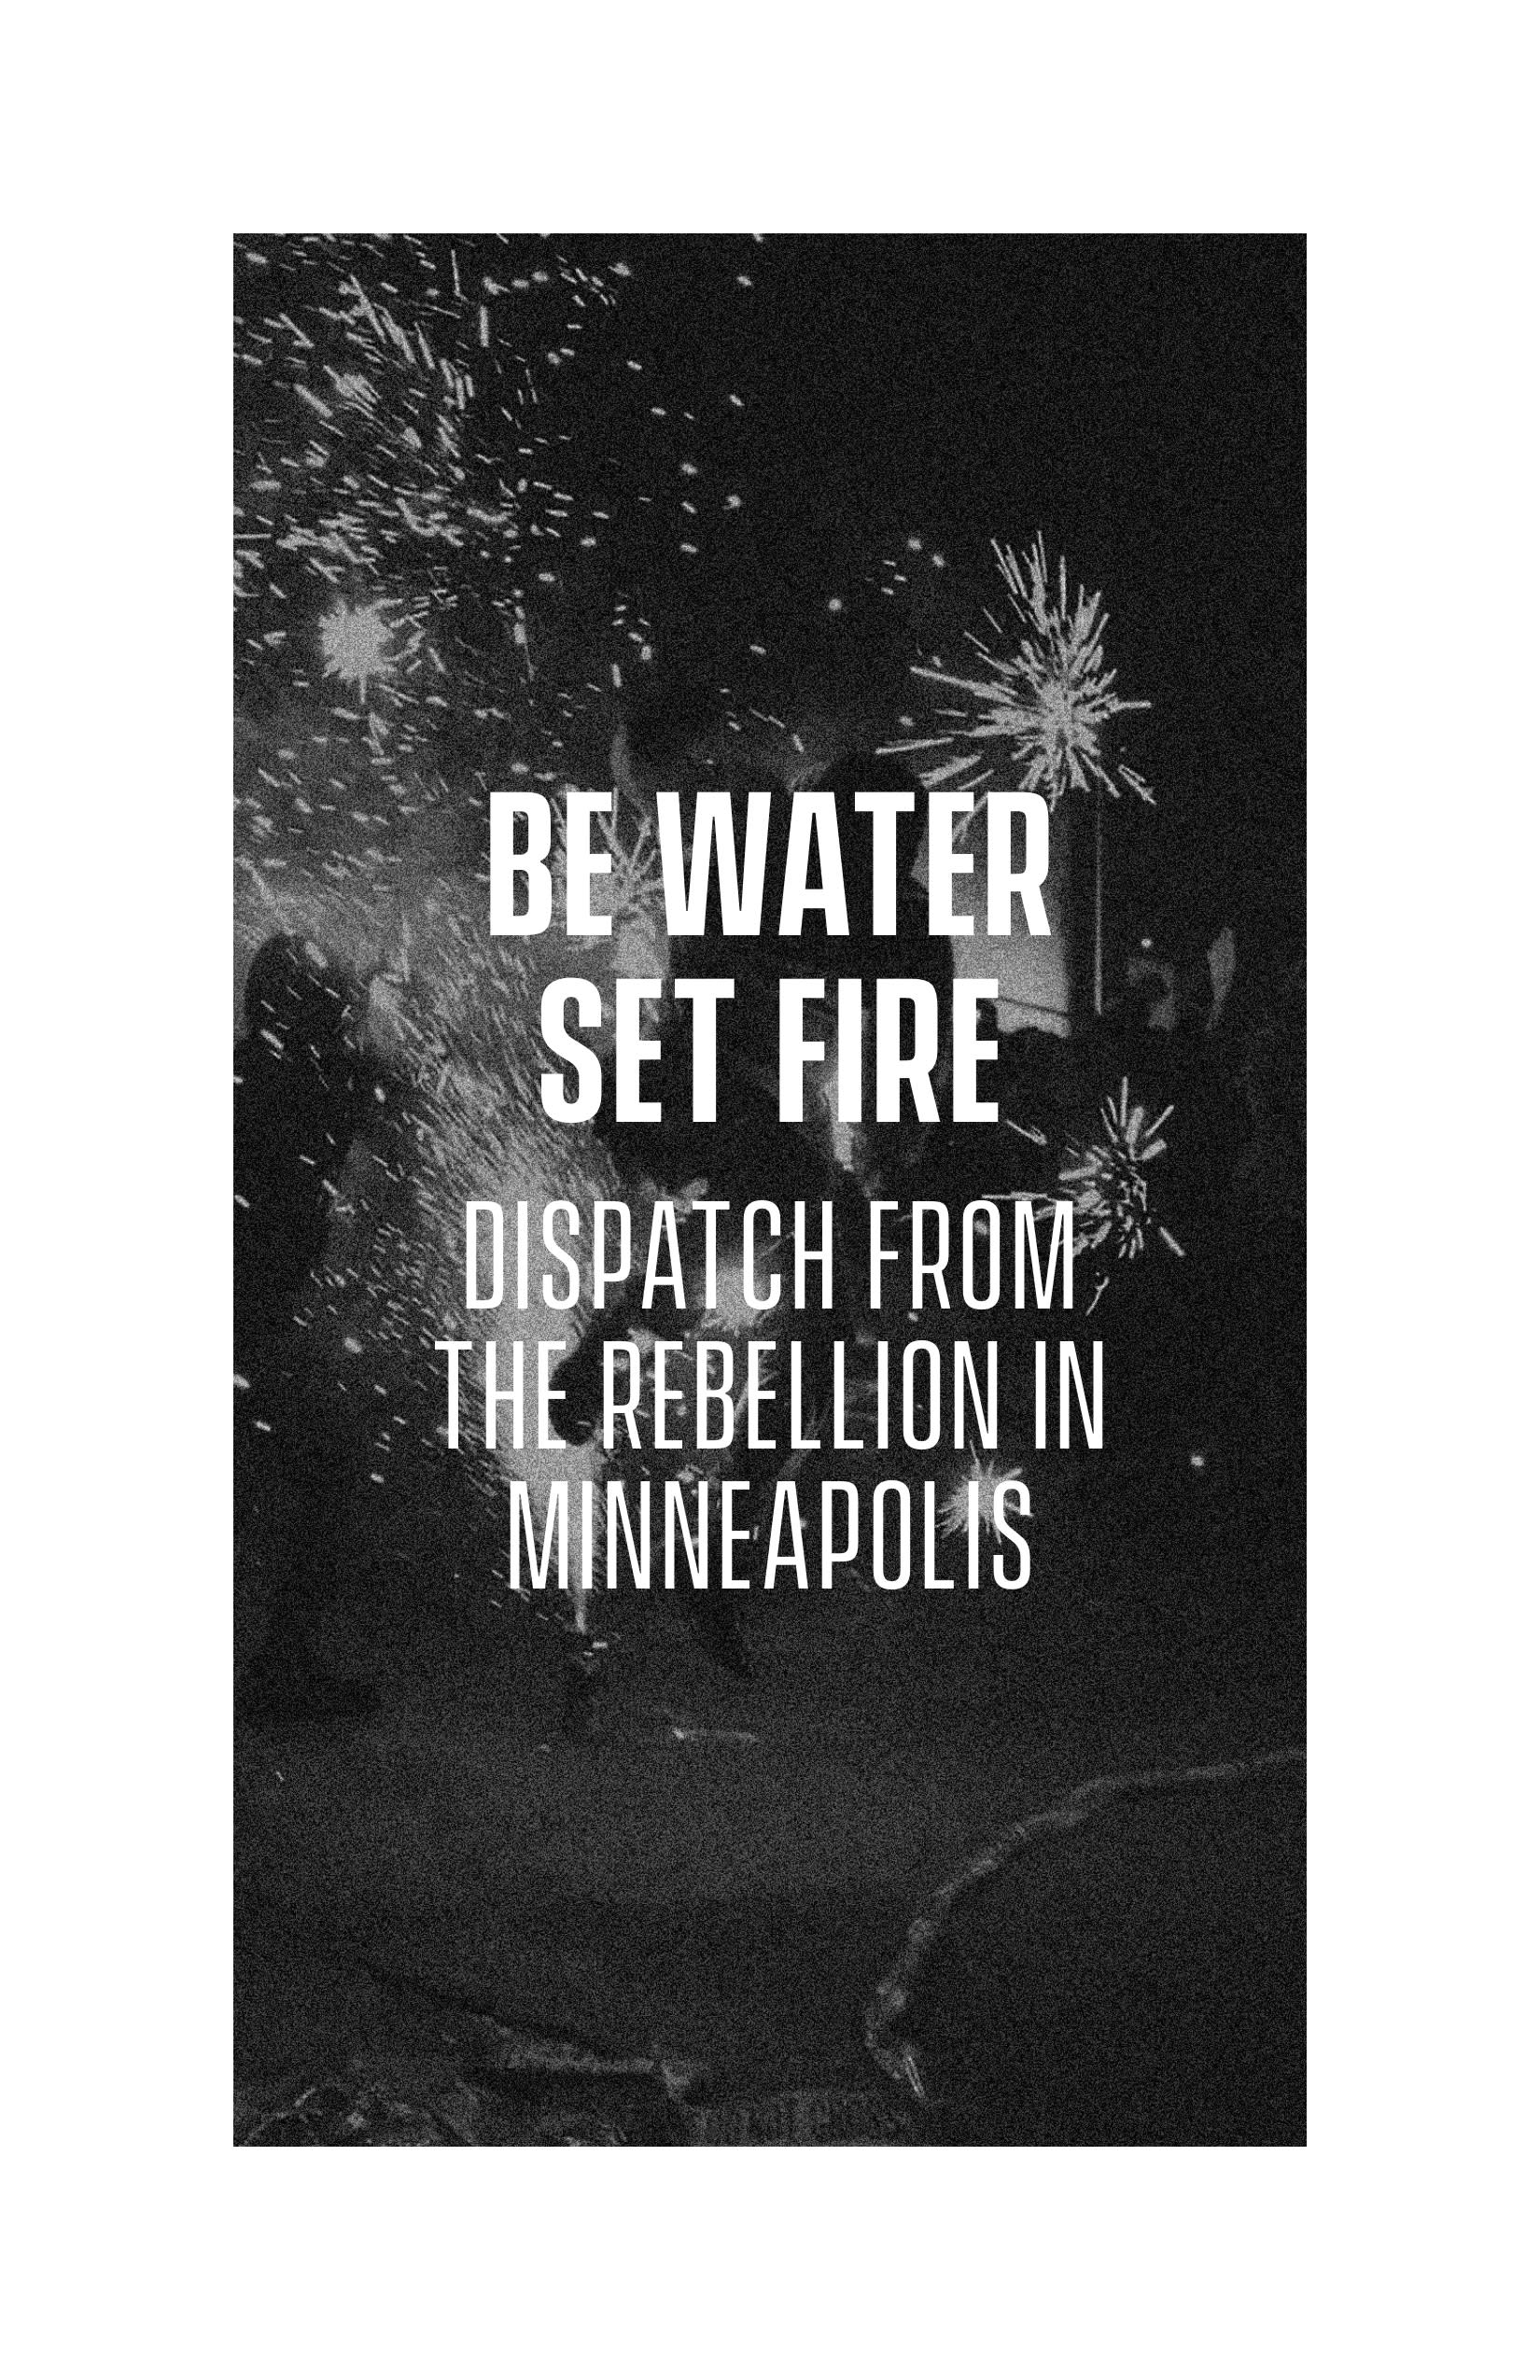 Cover Image for Be Water, Set Fire: Dispatch from the Rebellion in Minneapolis